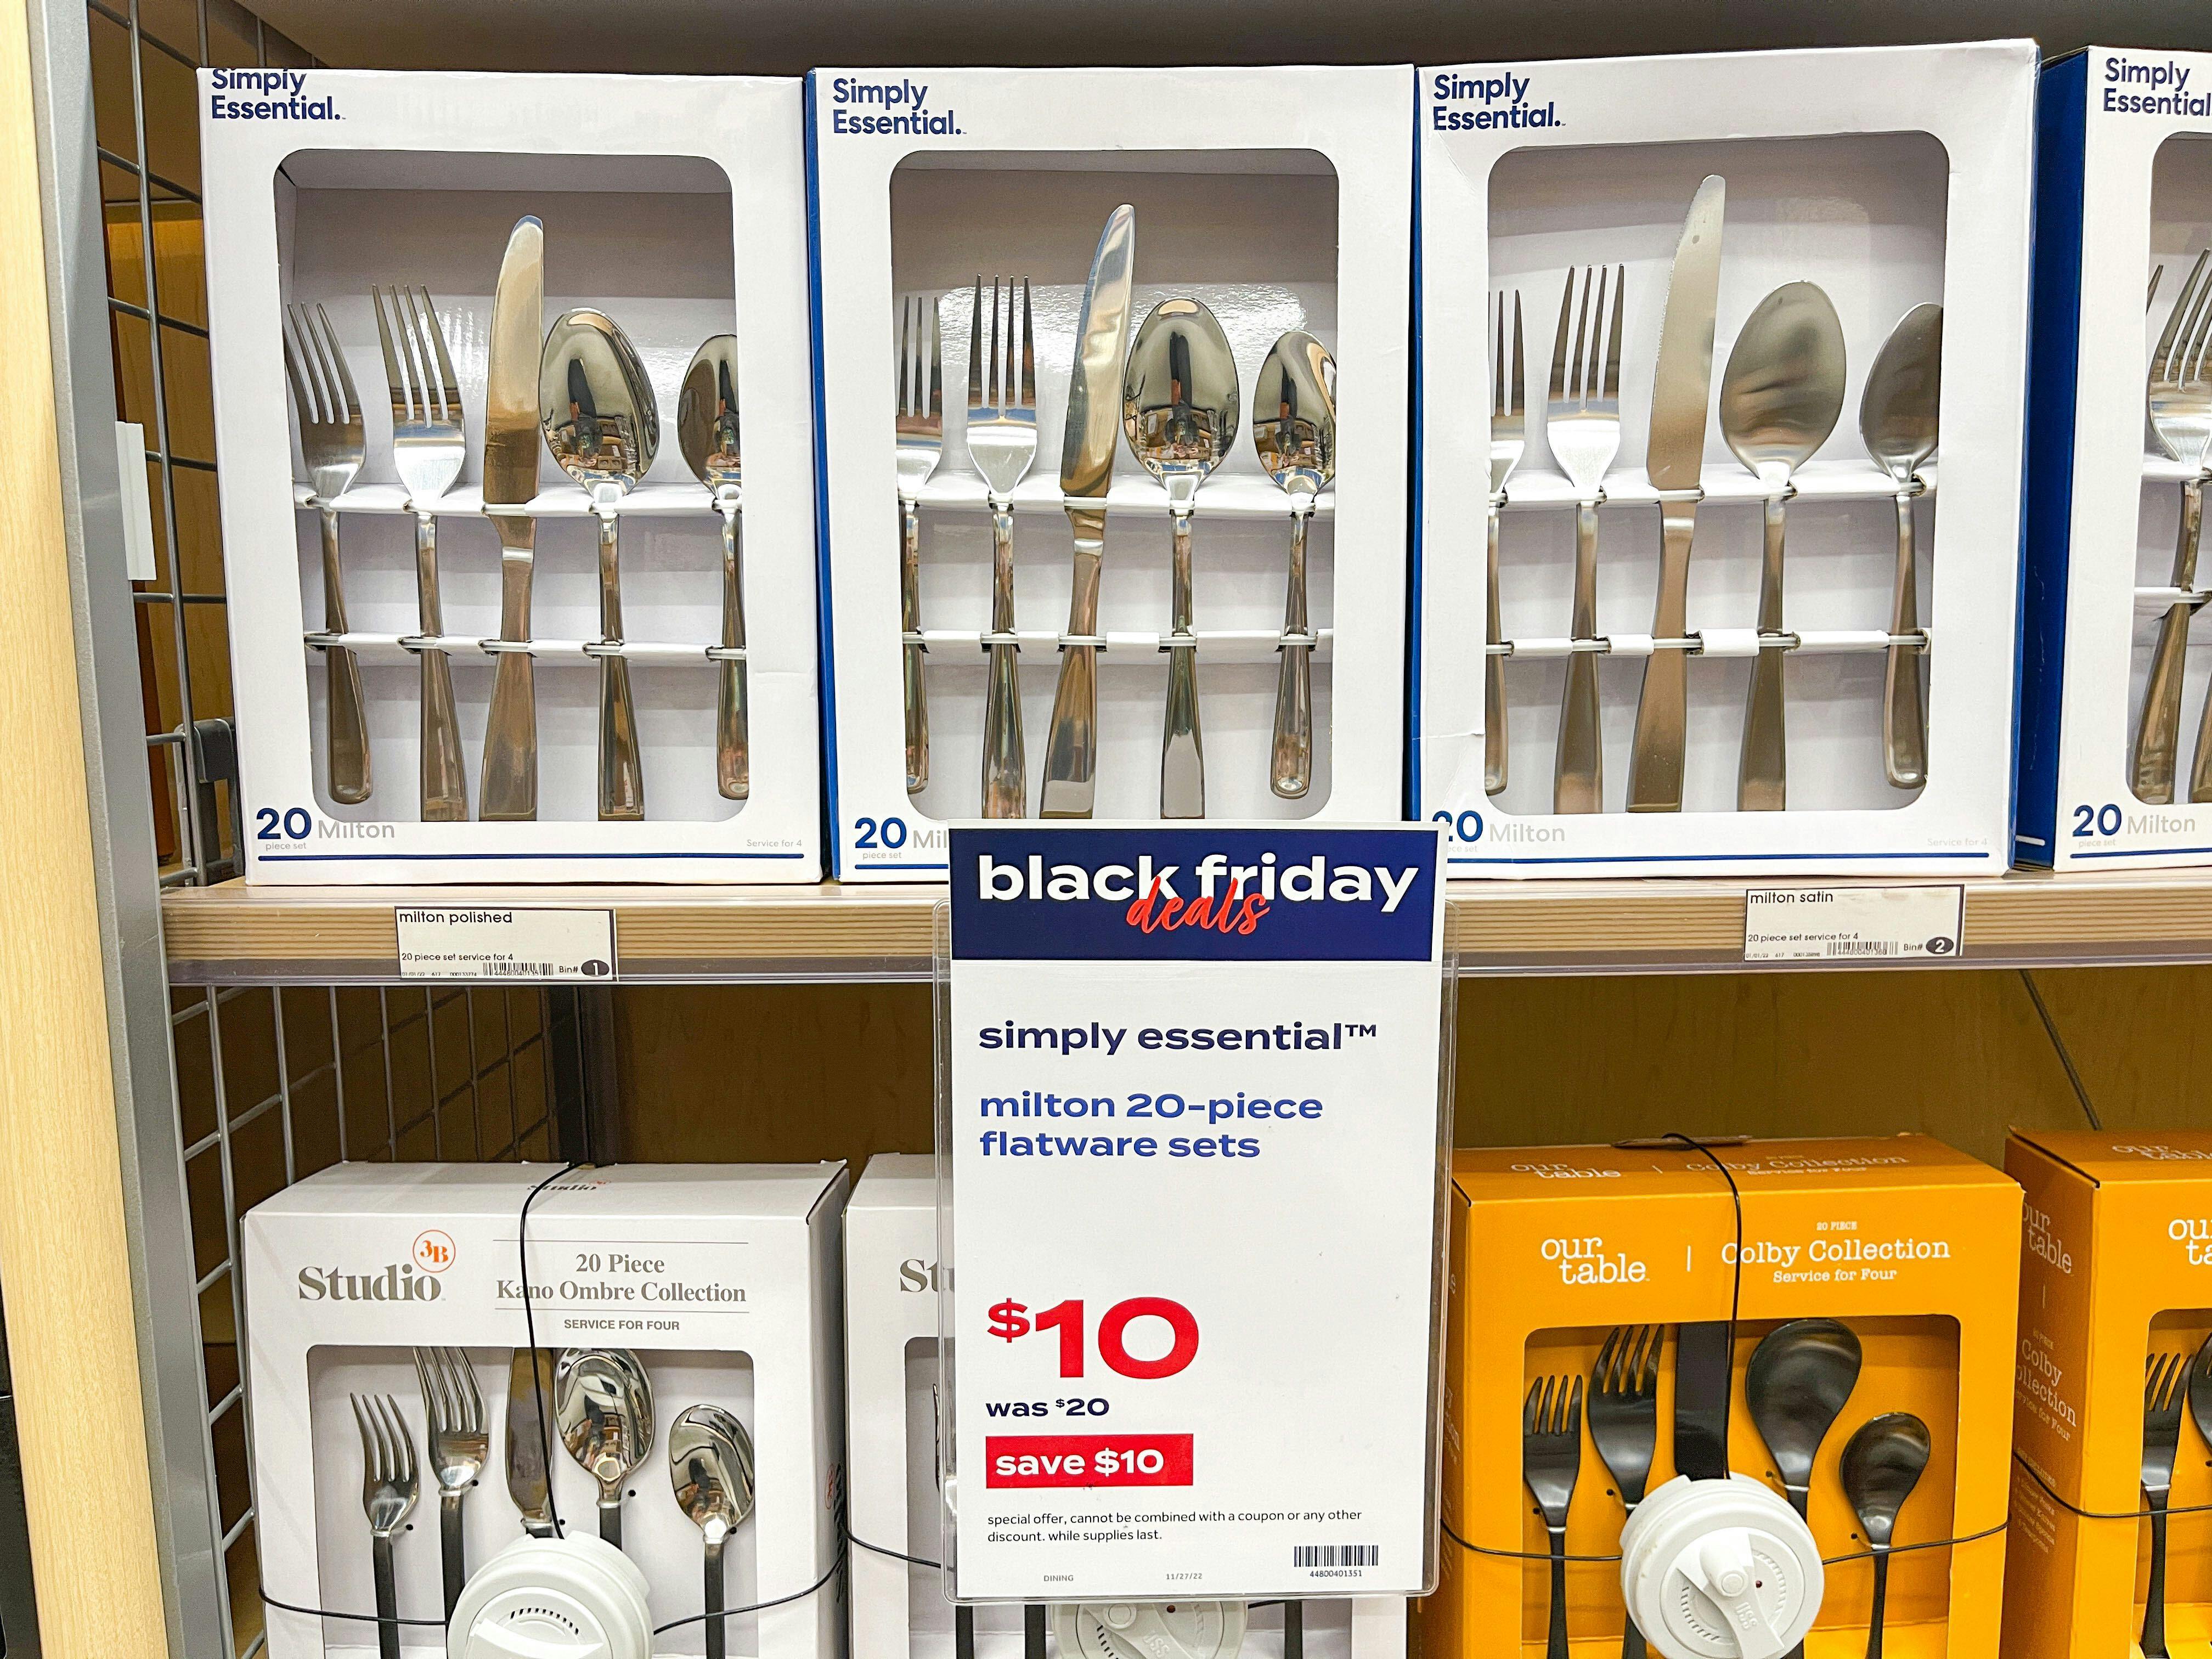 Black friday sign in front of flateware sets at Bed Bath & Beyond